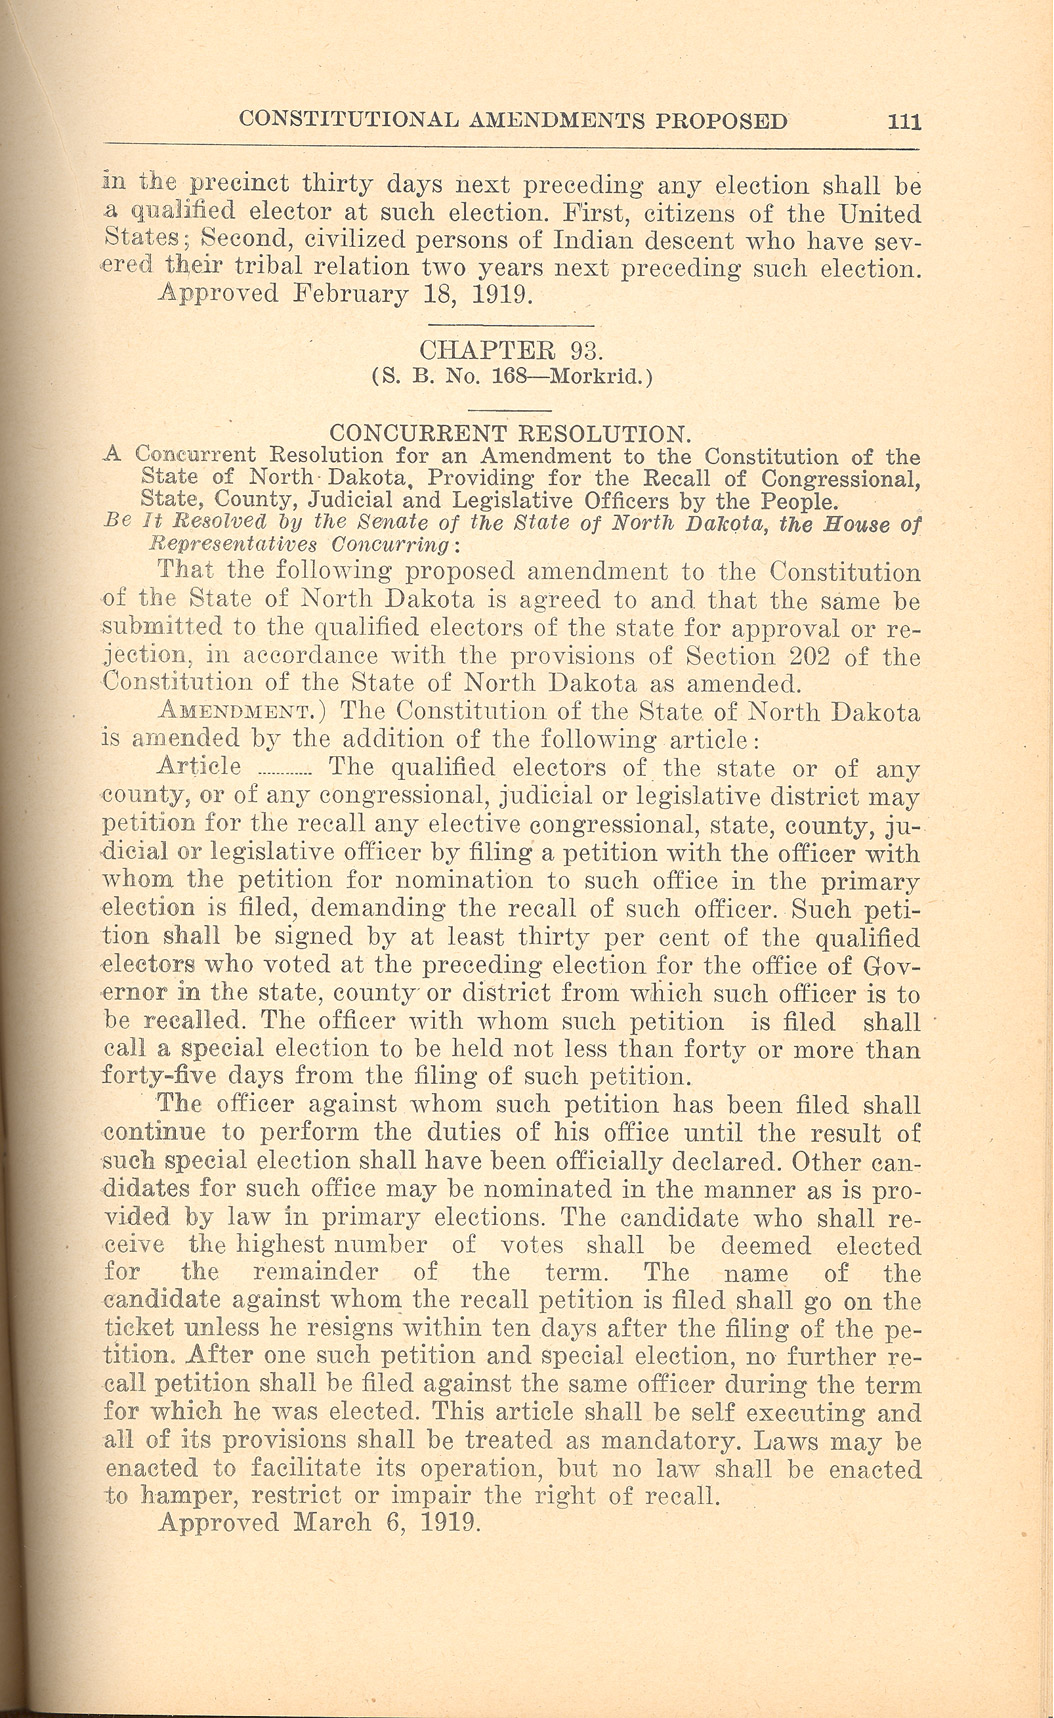 The recall amendment of 1919 laid out exact processes for citizens to use in bringing the election of a state official to a vote.